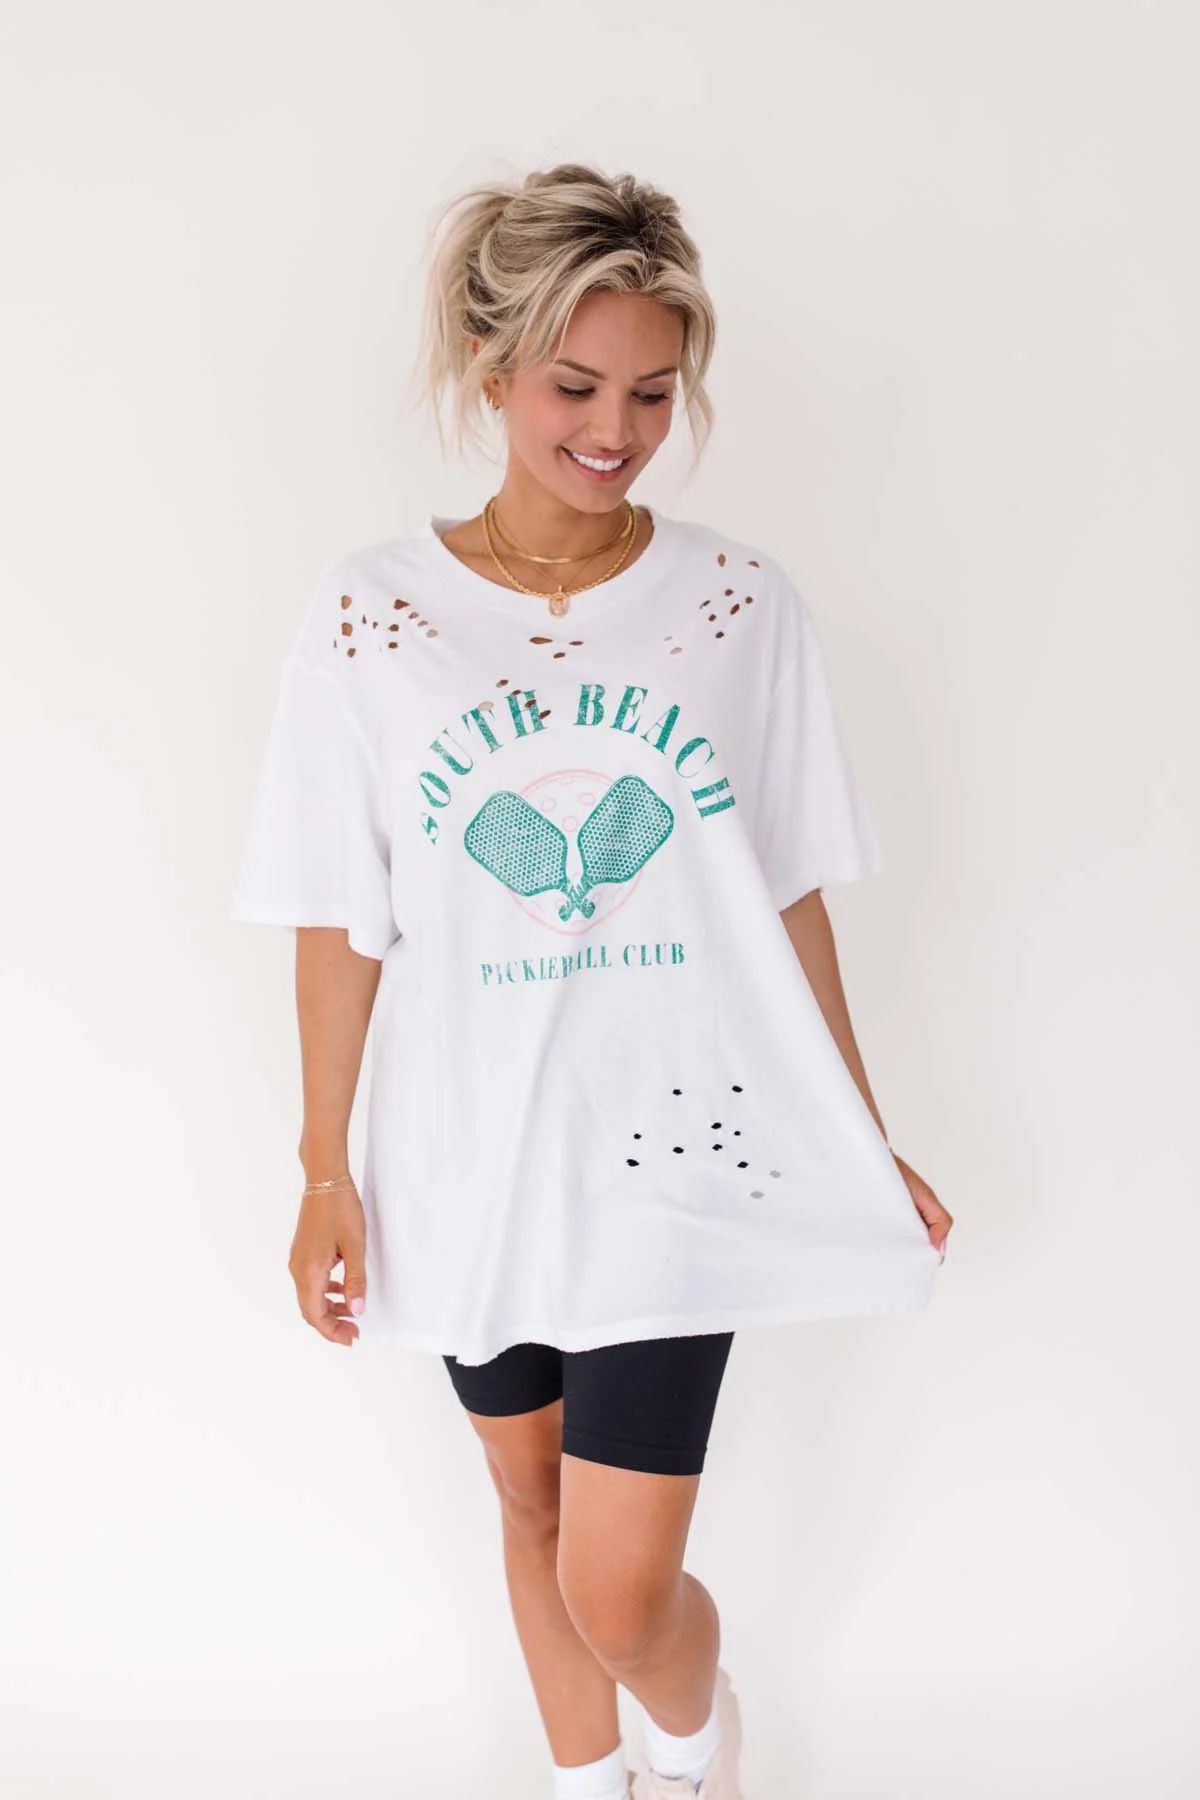 South Beach Distressed Graphic Tee - FINAL SALE | The Post